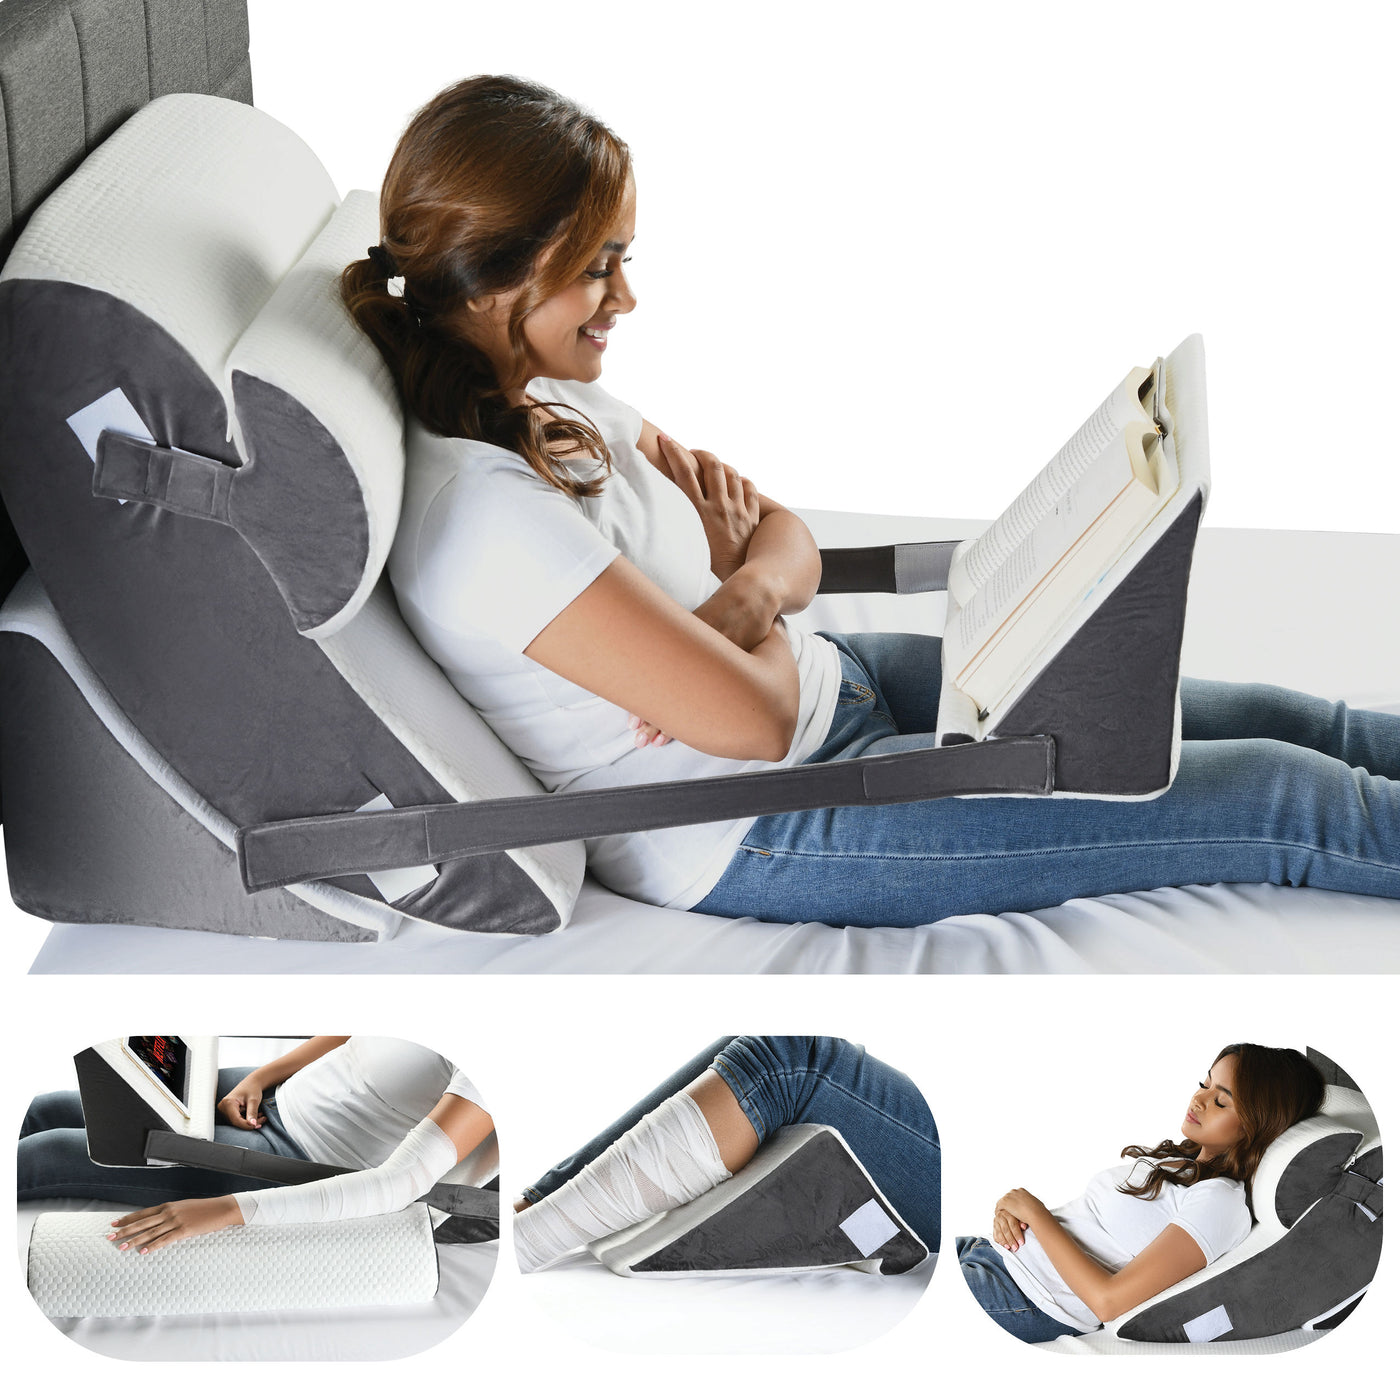 Wedge Pillow Set Includes a Patent Pending Bed Desk Reading Pillow